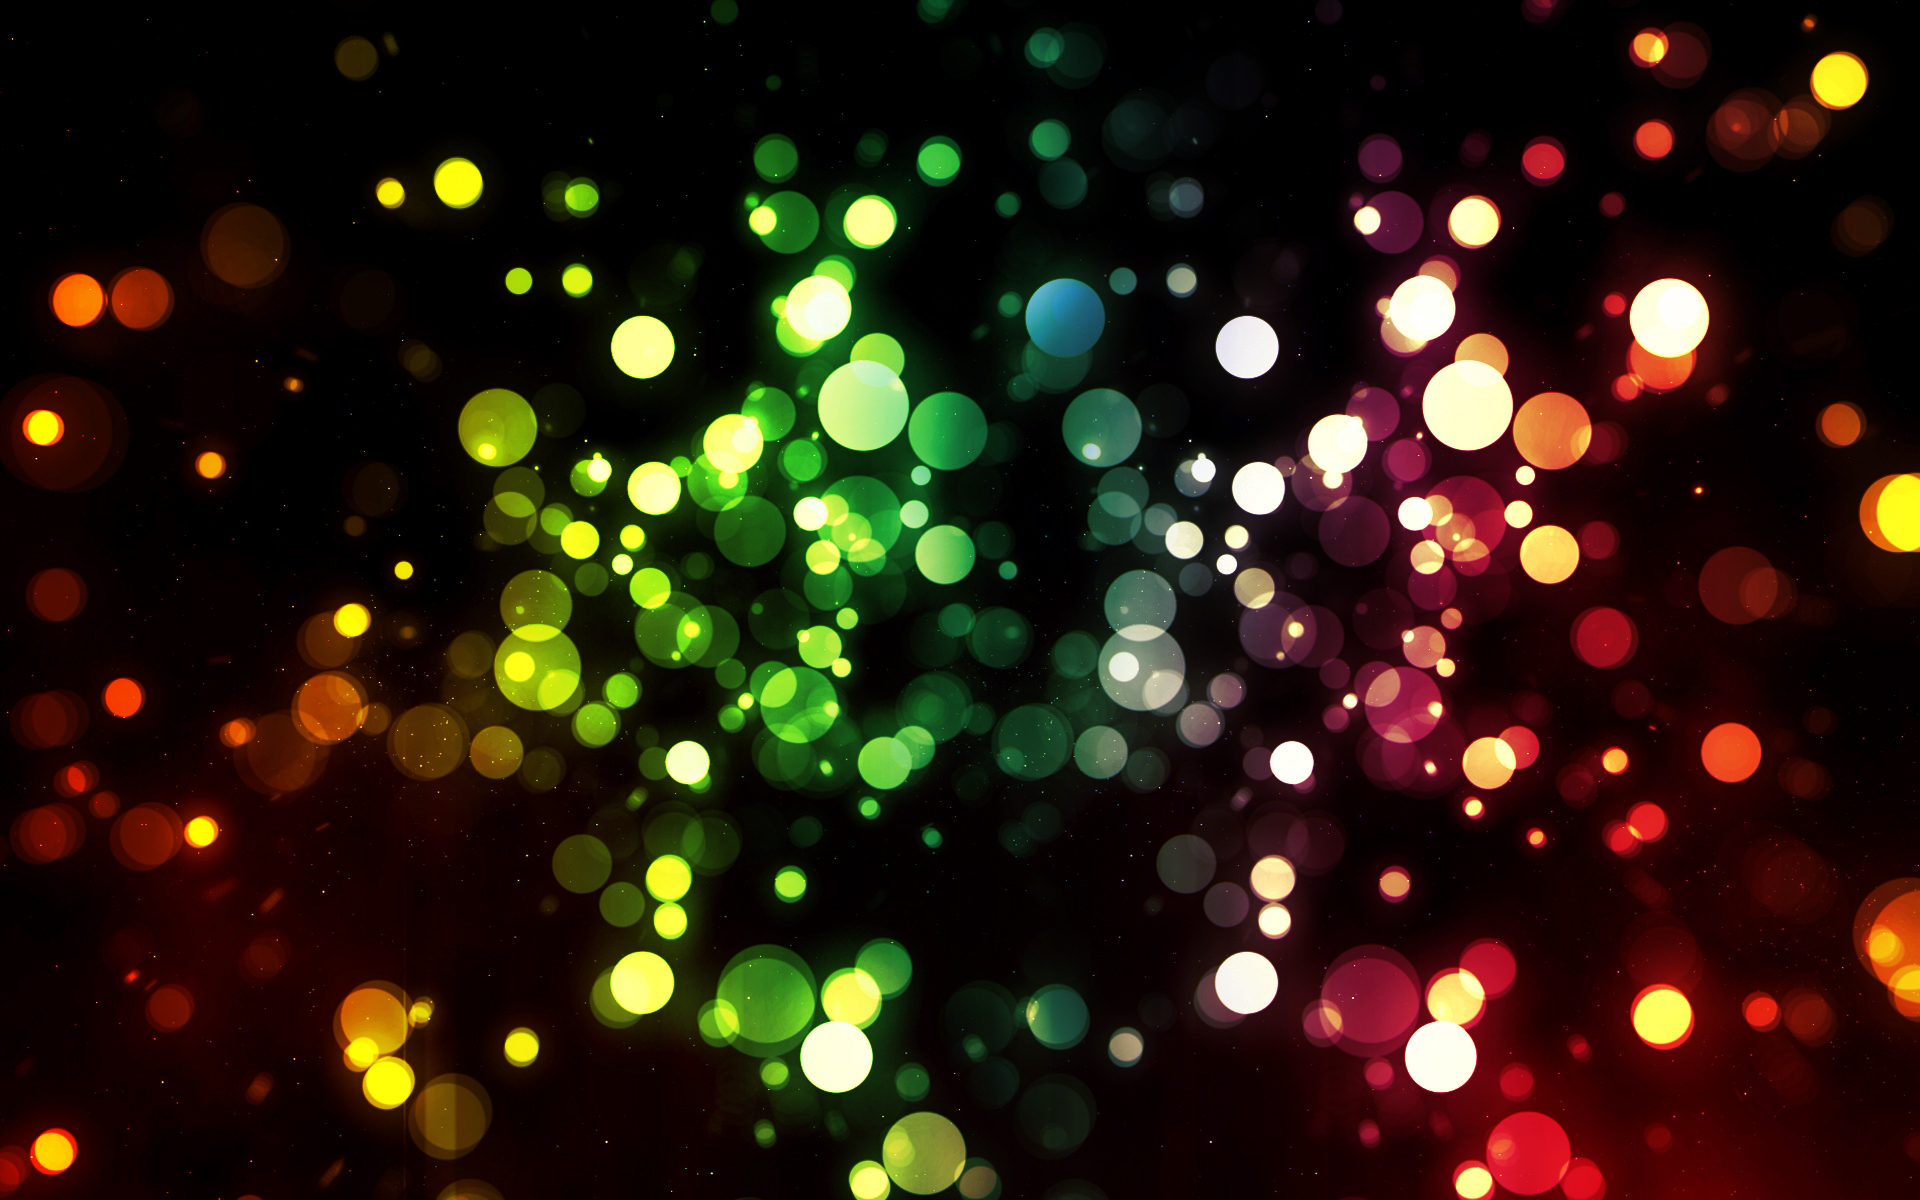  Sparkle HD Wallpapers Colors of Sparkle Desktop Wallpapers Colors of